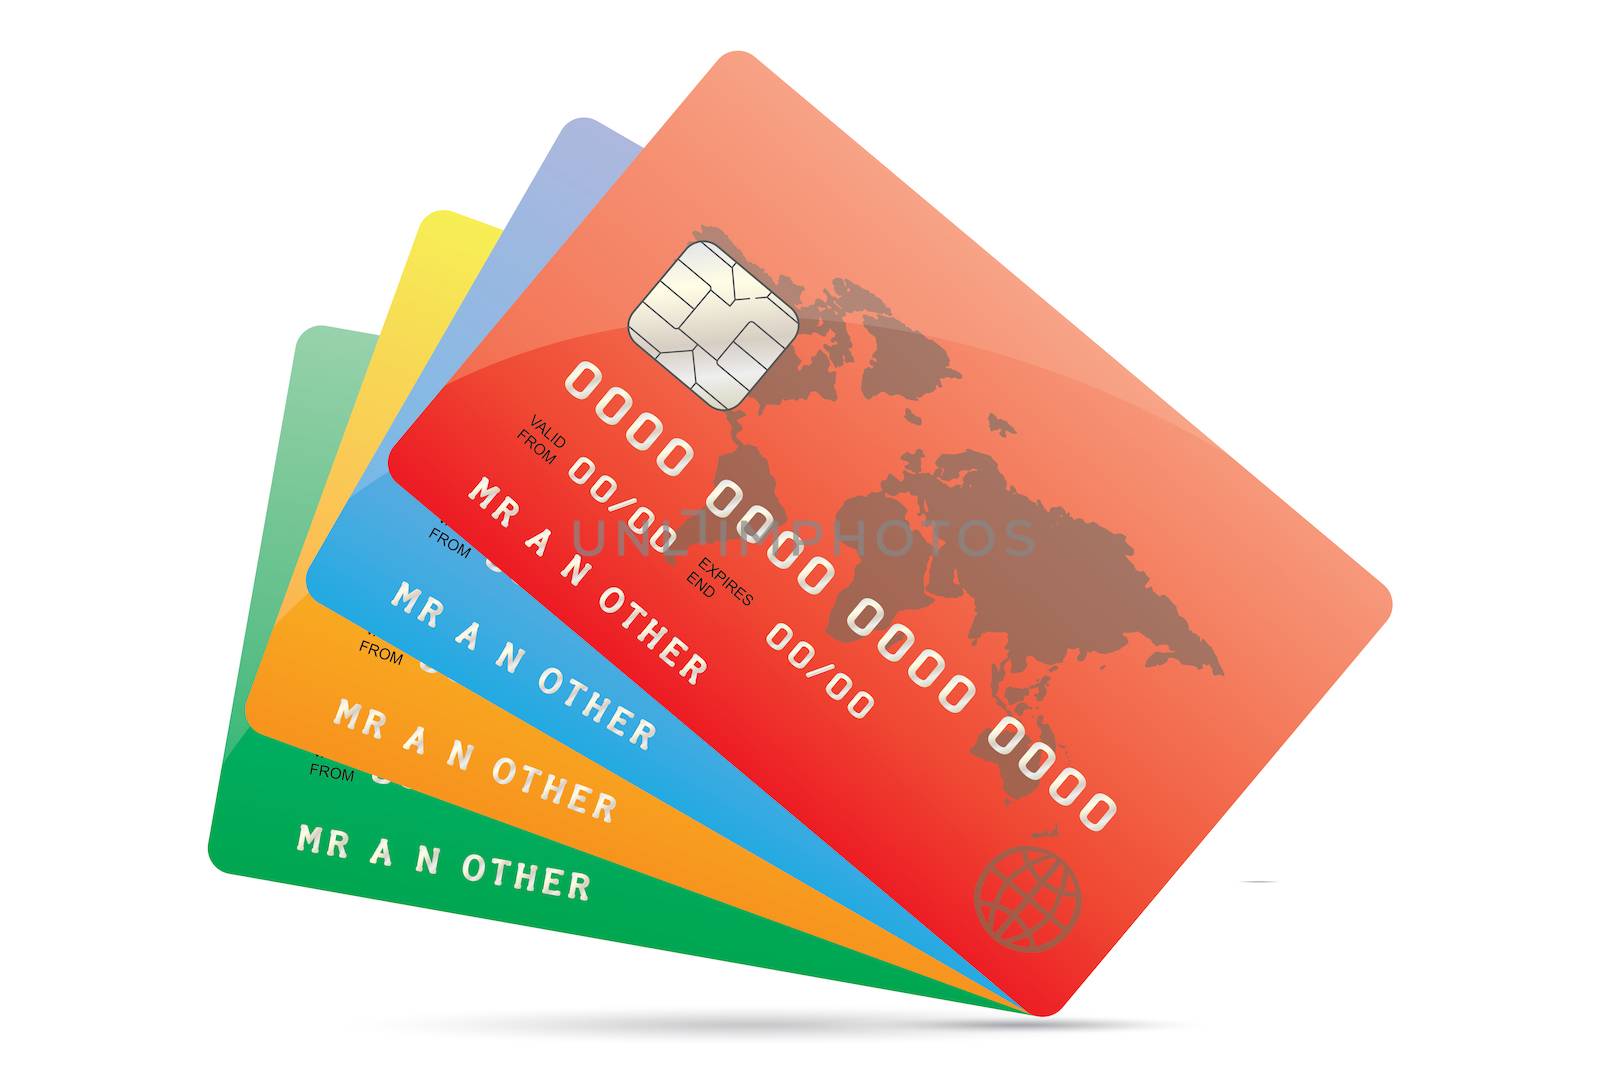 An Illustration of Credit Cards